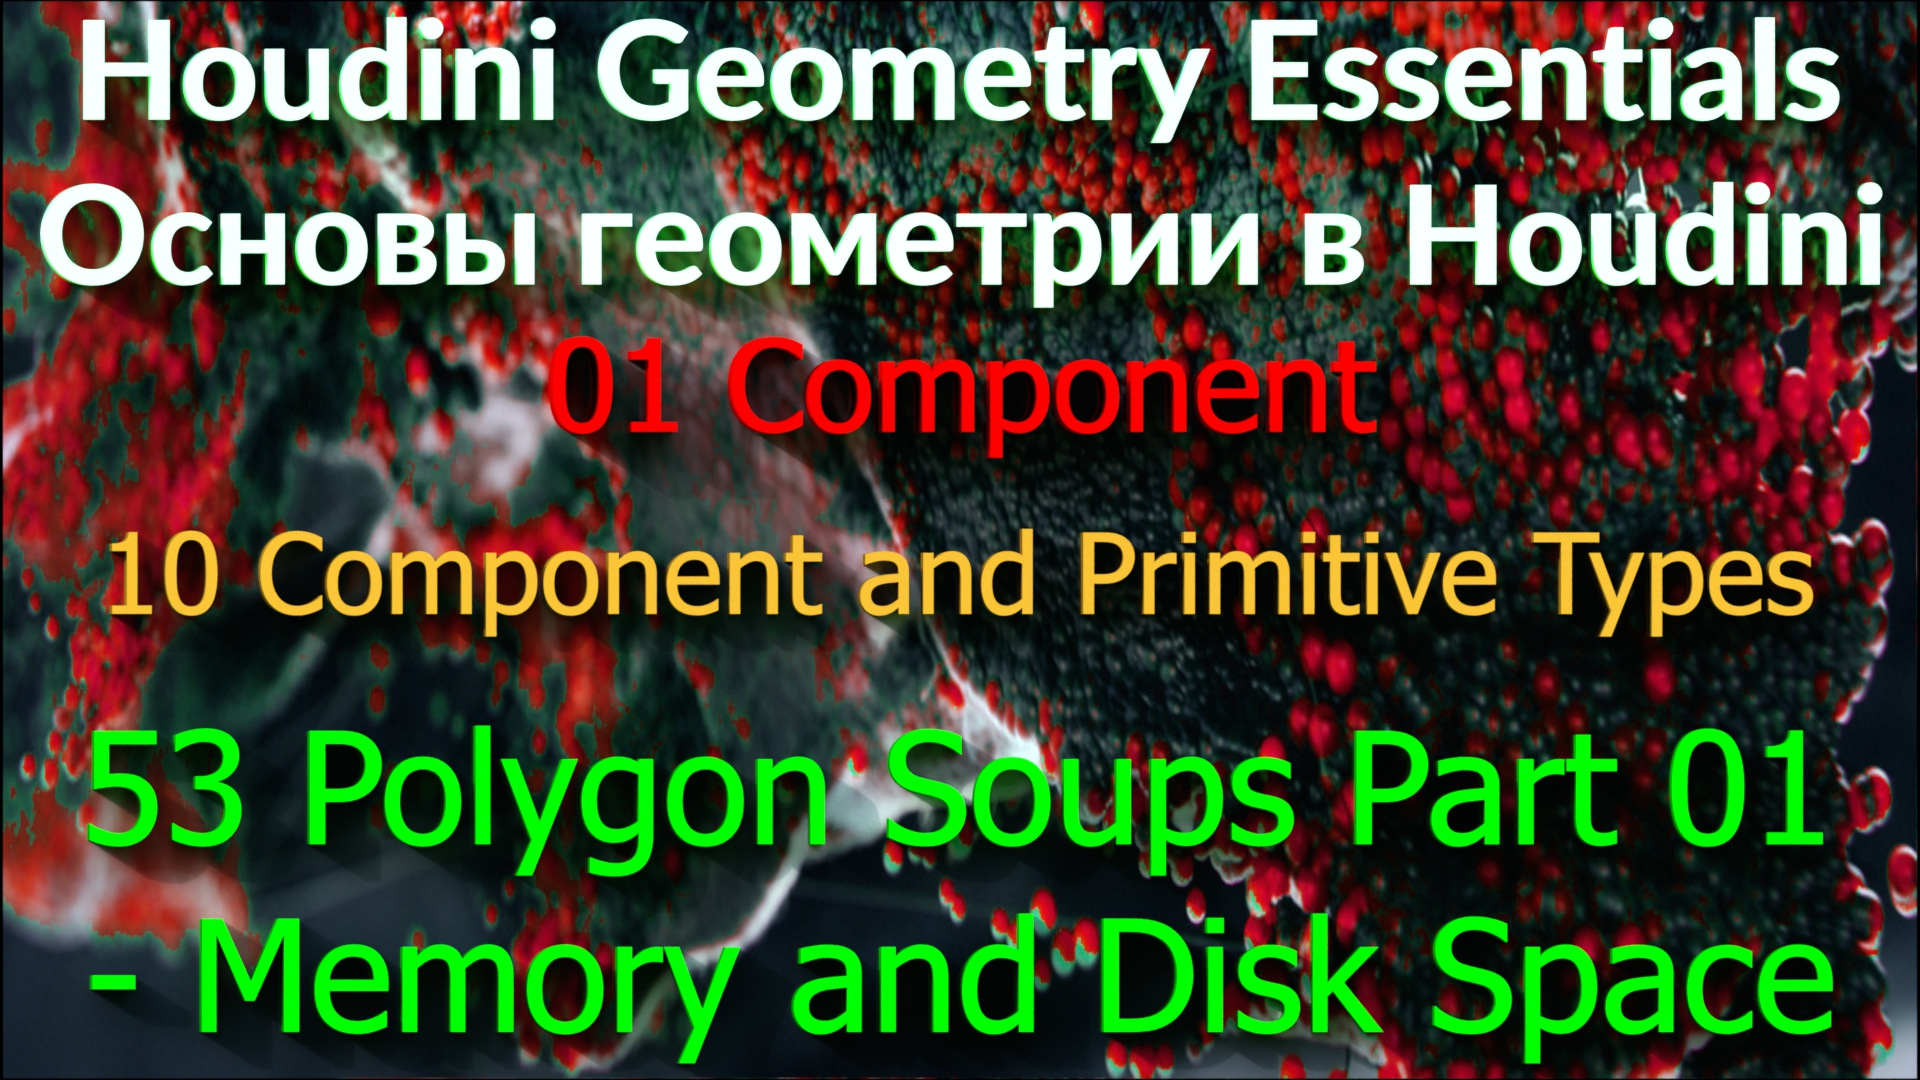 01_10_53 Polygon Soups Part 01 - Memory and Disk Space